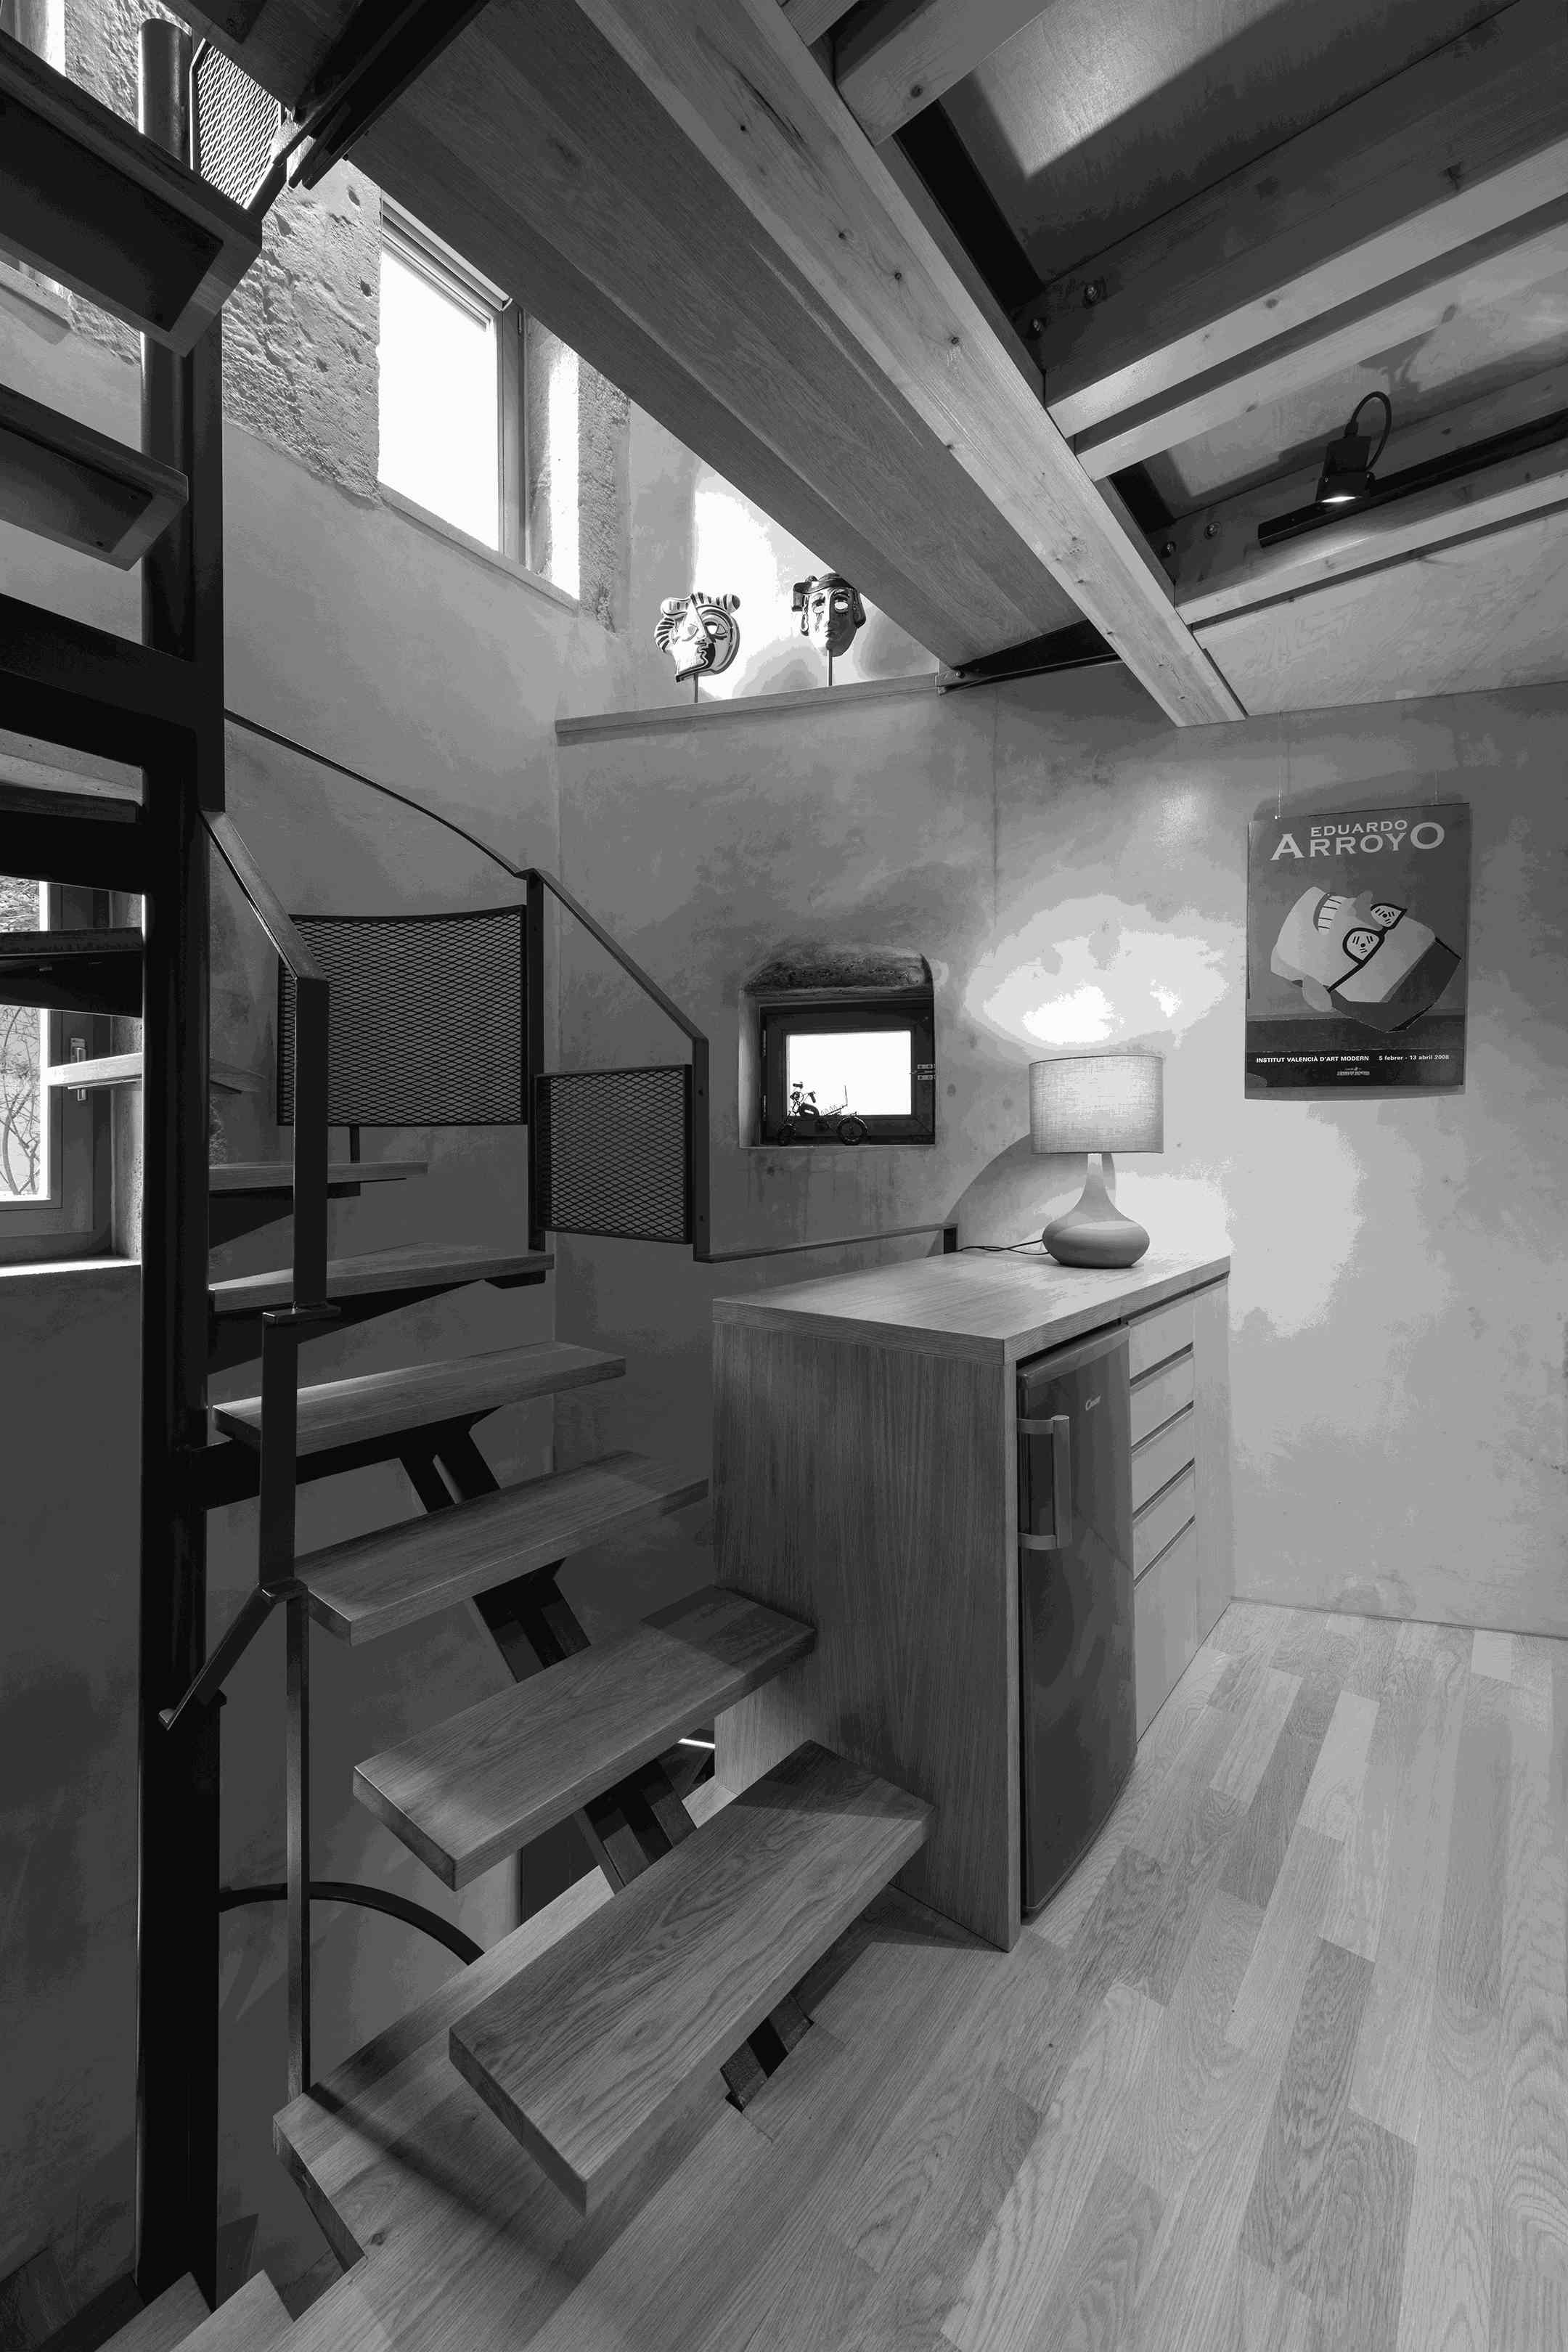 Rehabilitation of a Small Three Storey House in the Old Town of Chania, Crete by I.K. Verikakis Architectural Office No4